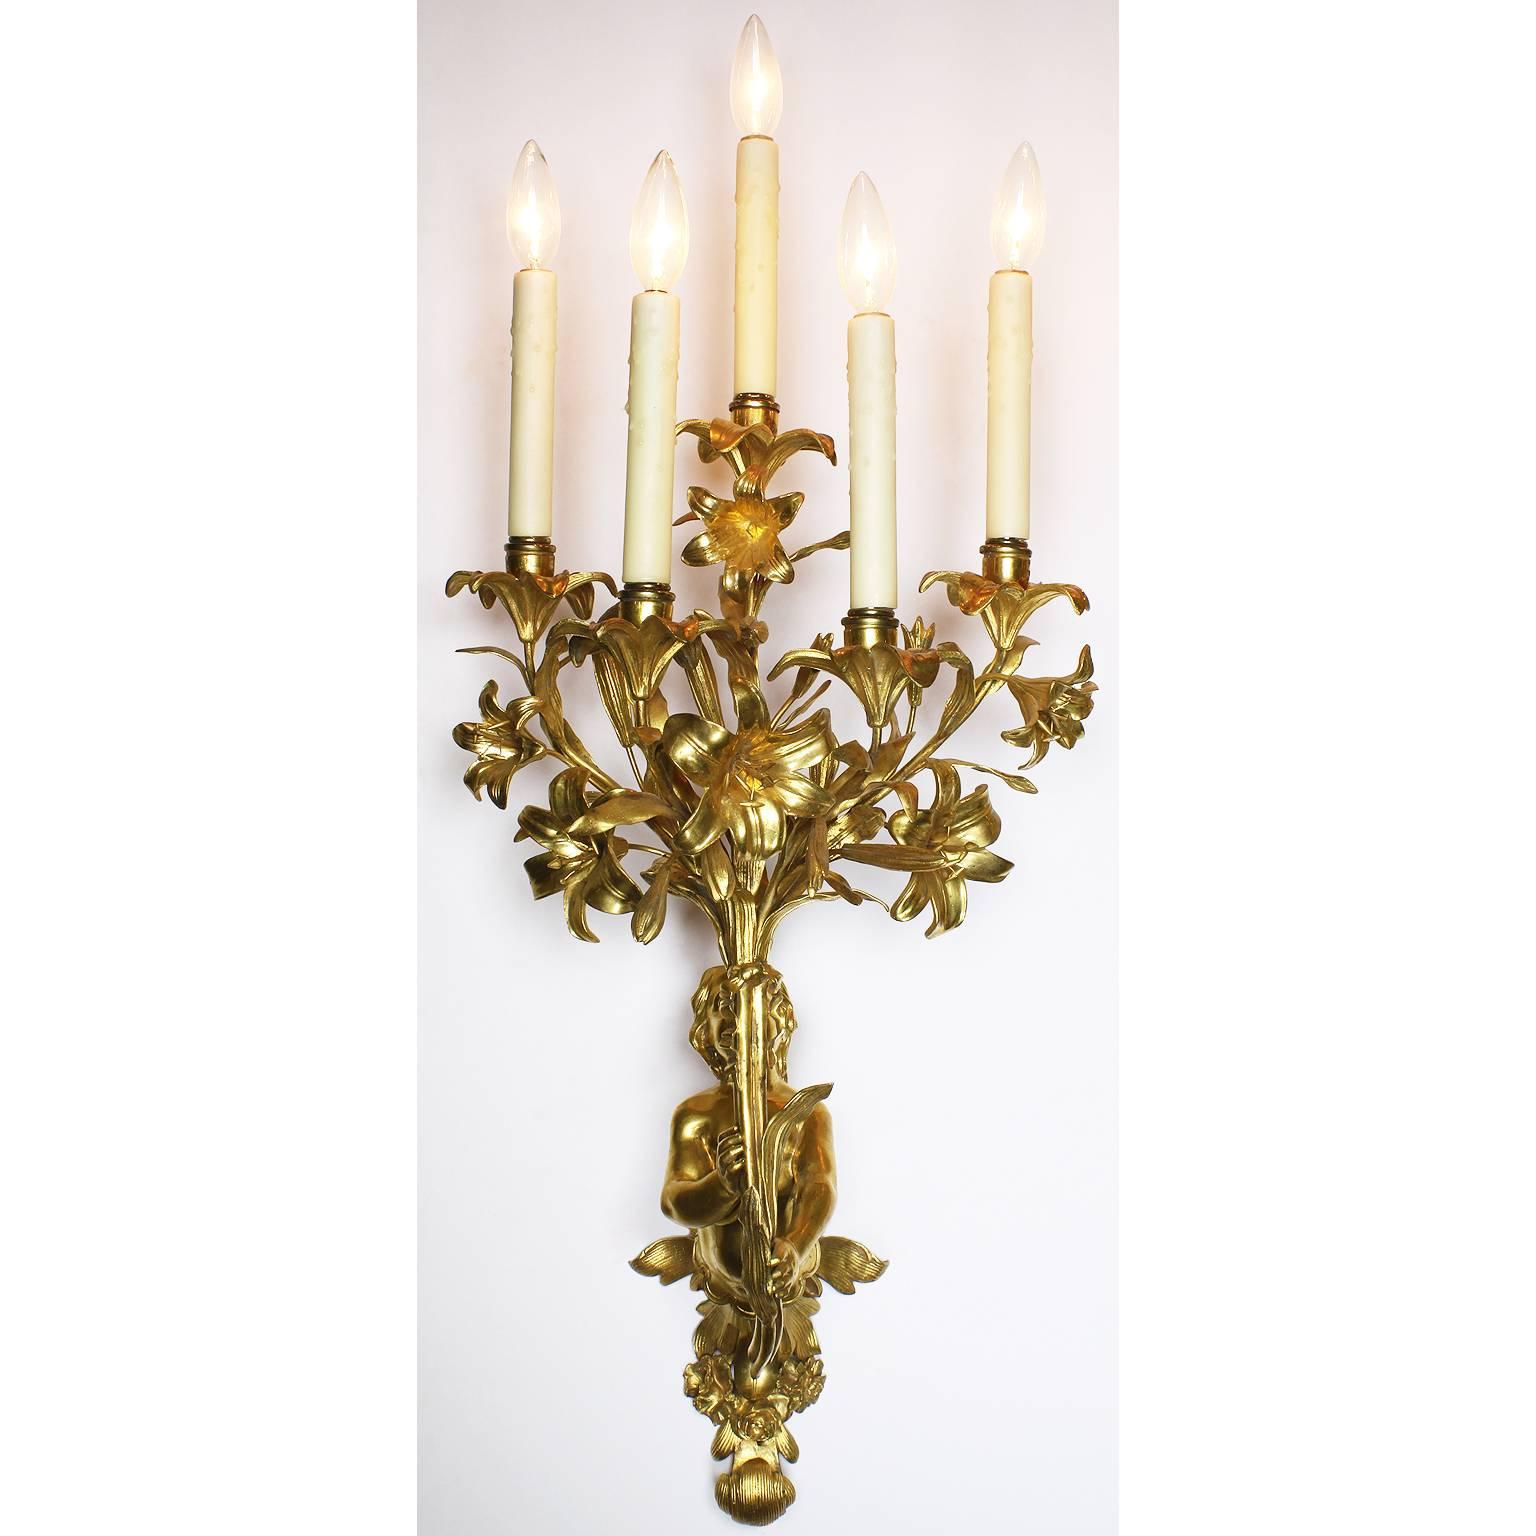 A very fine and charming pair of French 19th century neoclassical style figural gilt-bronze five-light wall sconces. Each wall light depicting a putto with his torso leaning forward and holding holding on an ornate floral candelabrum (Now